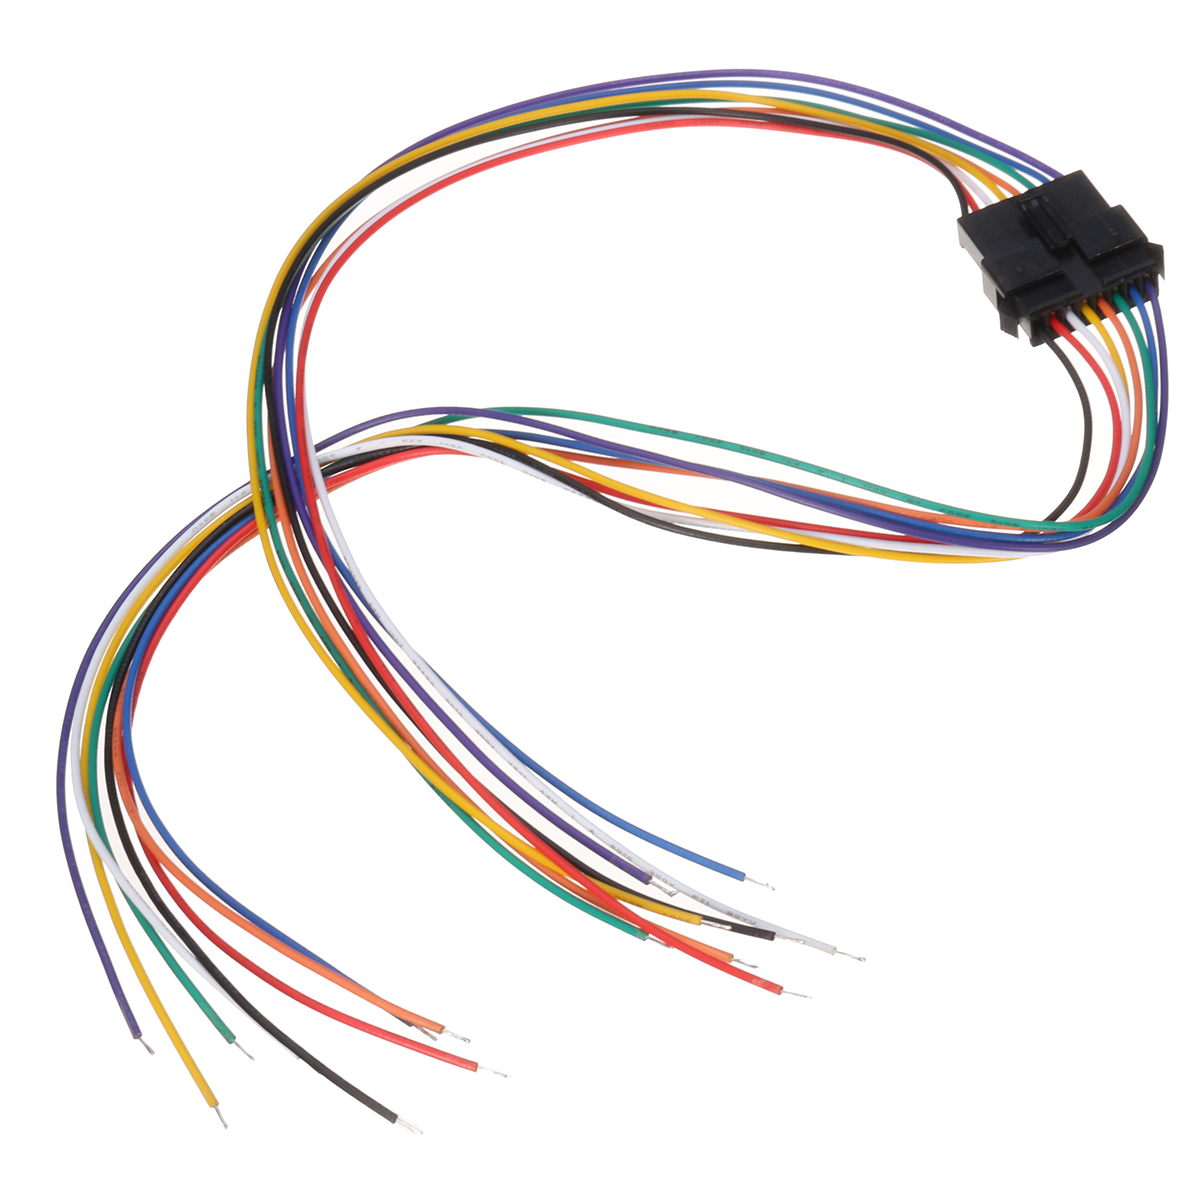 10-Set-Jst-25mm-SM-8-Pin-Male--Female-Connector-Plug-With-Wire-Cable-300mm-1170148-7